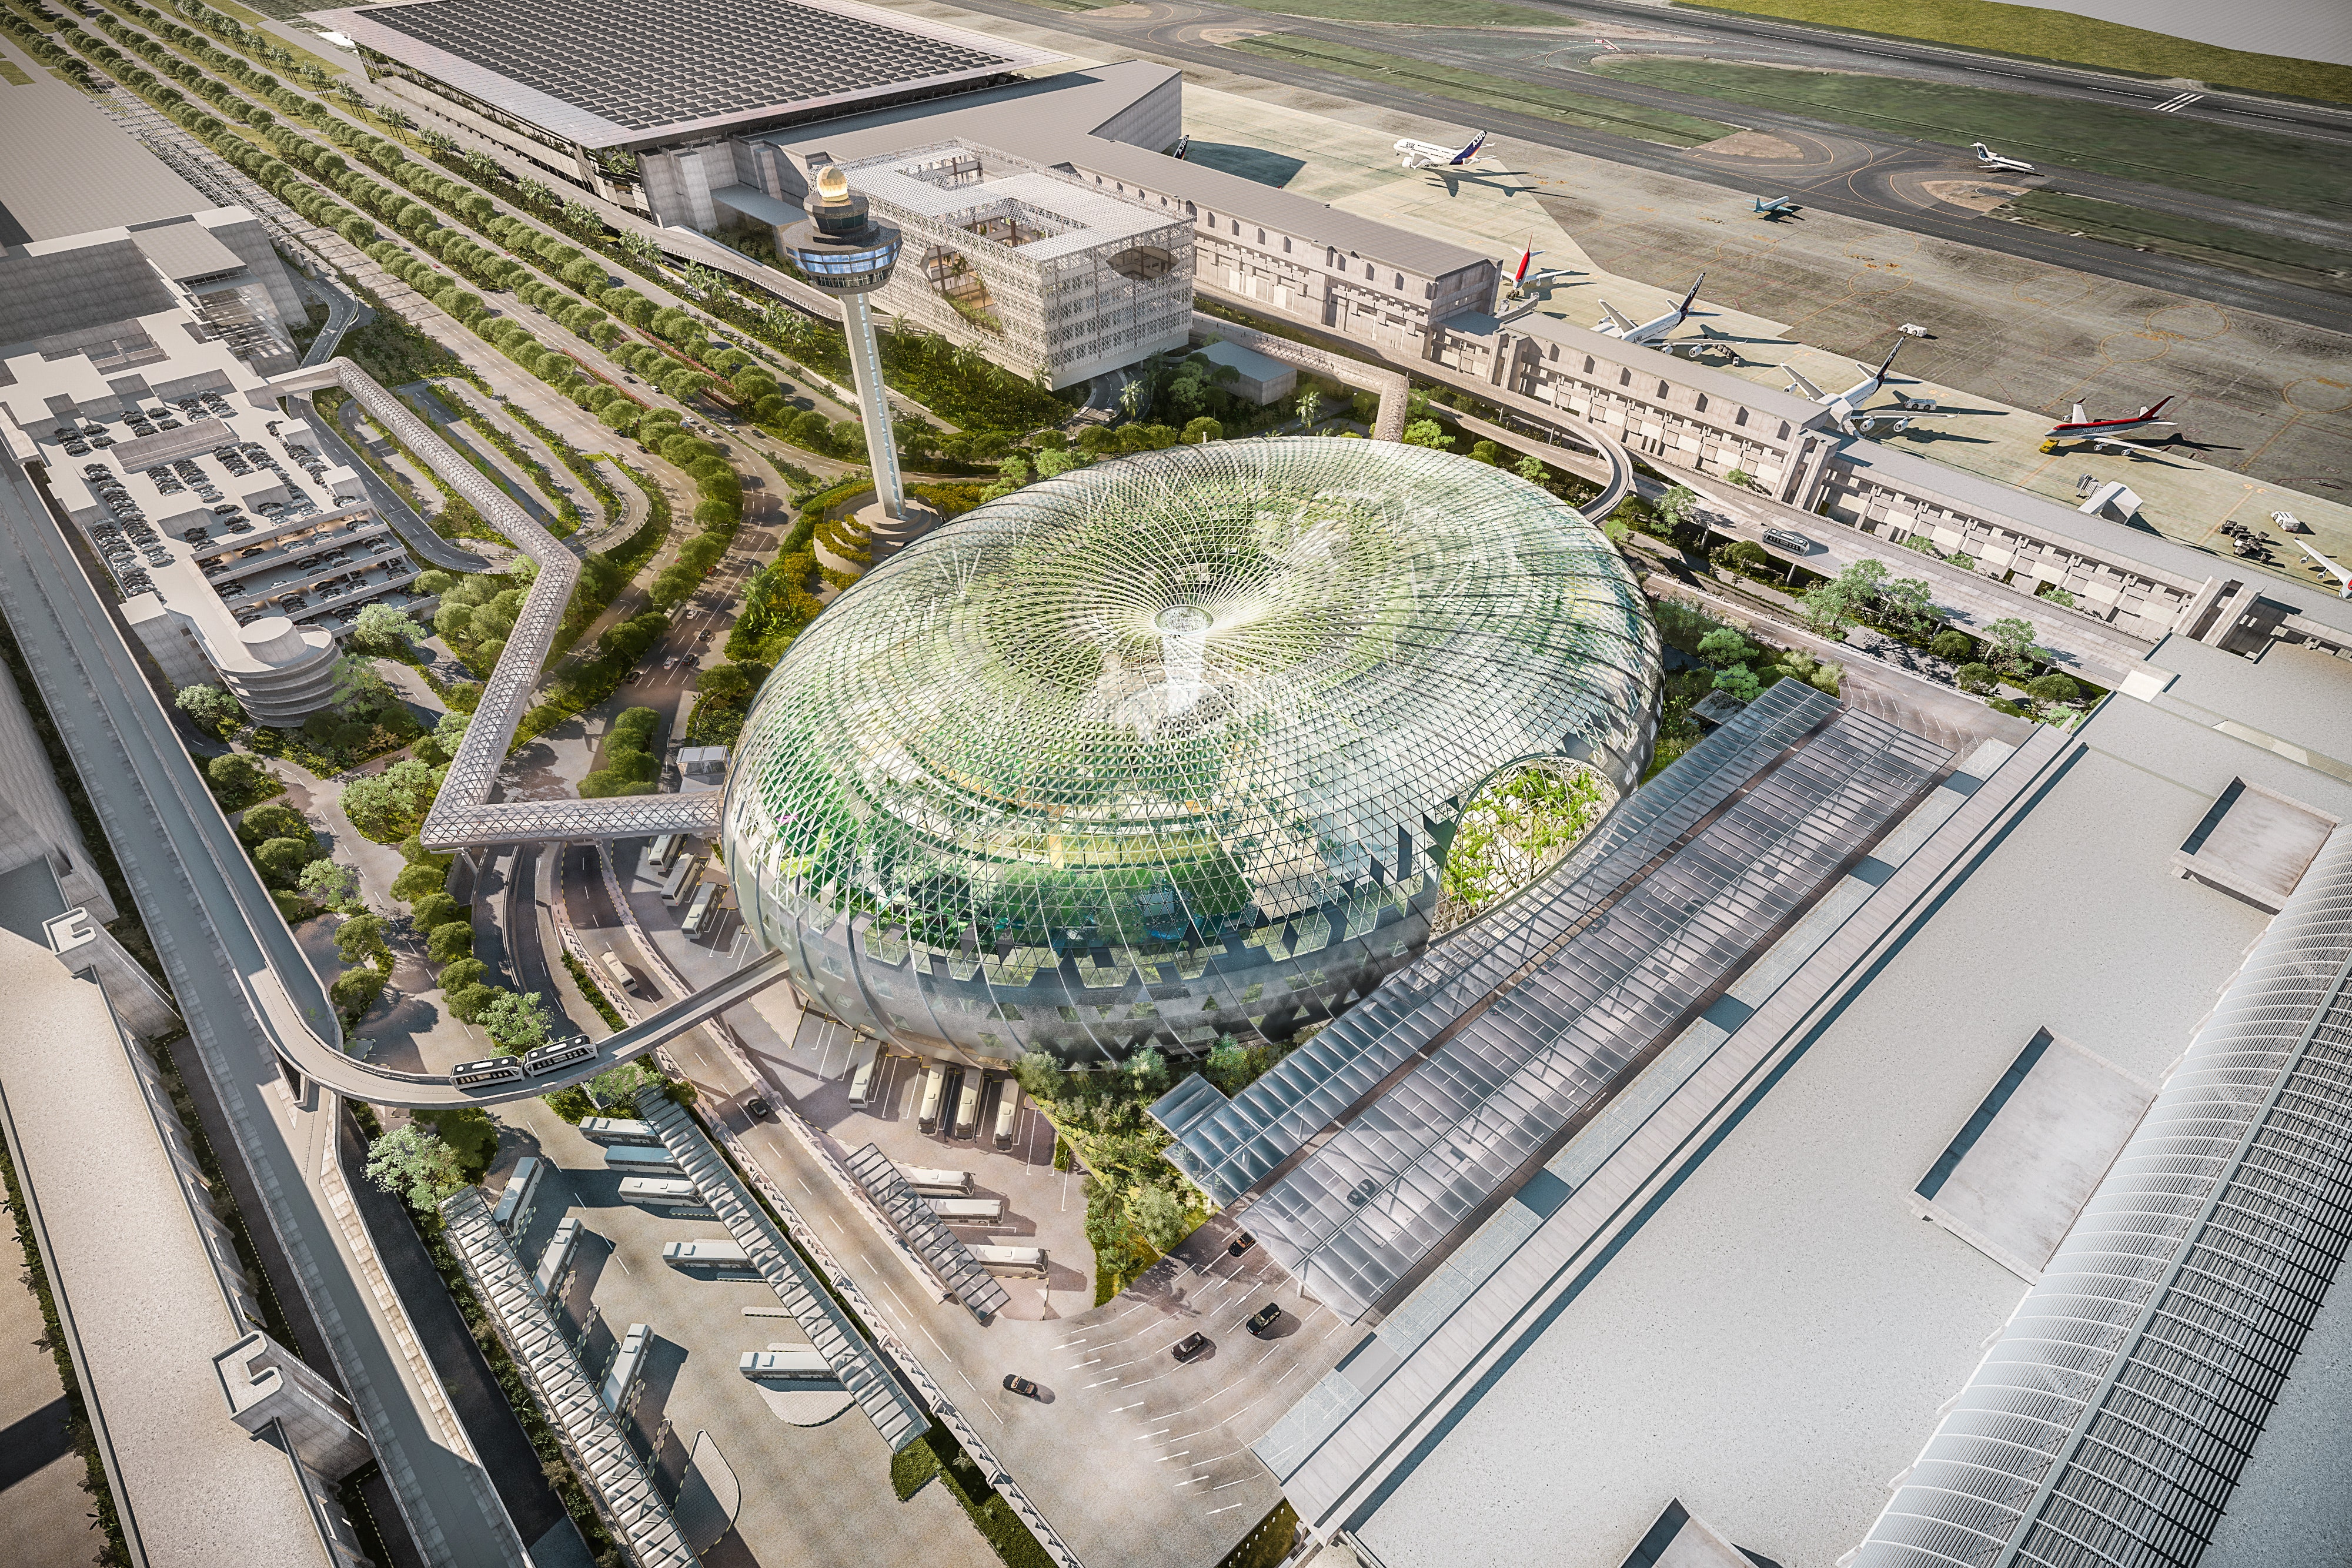 JewelChangiAirport_Aerial-View_Image-Courtesy--Safdie-Architects-and-Jewel-Changi-Airport-Devt..jpg